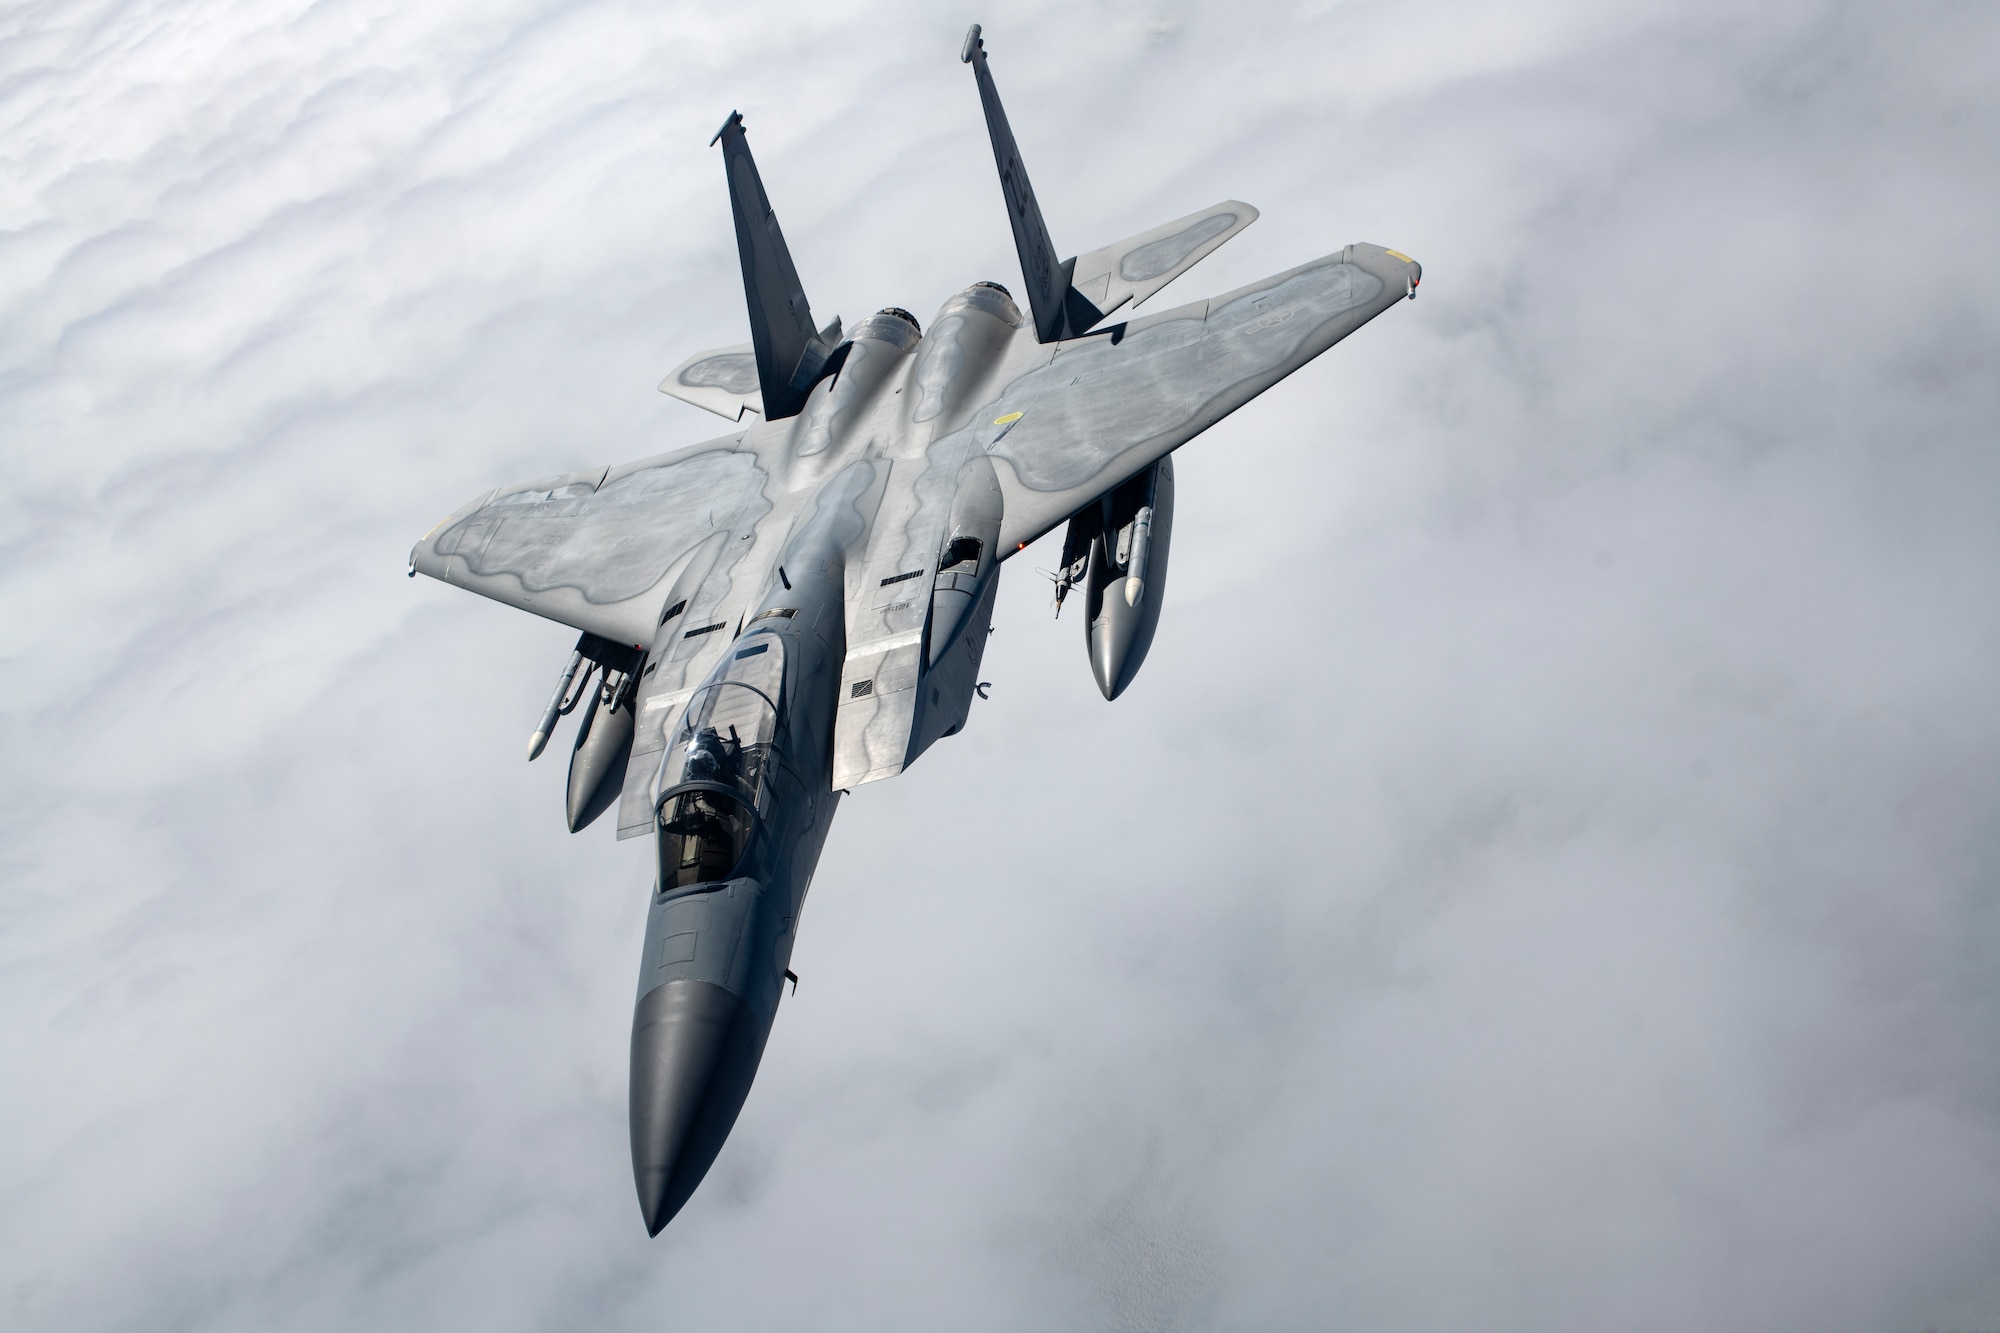 A 44th Fighter Squadron F-15C Eagle departs after receiving fuel from a 909th Air Refueling Squadron KC-135 Stratotanker during a flight over the Pacific Ocean in support of exercise Keen Sword 23, Nov. 17, 2022. Bilateral exercises allow U.S. military and Japan Self-Defense Forces to work together across a variety of areas to enhance interoperability and readiness. (U.S. Air Force photo by Senior Airman Jessi Roth)